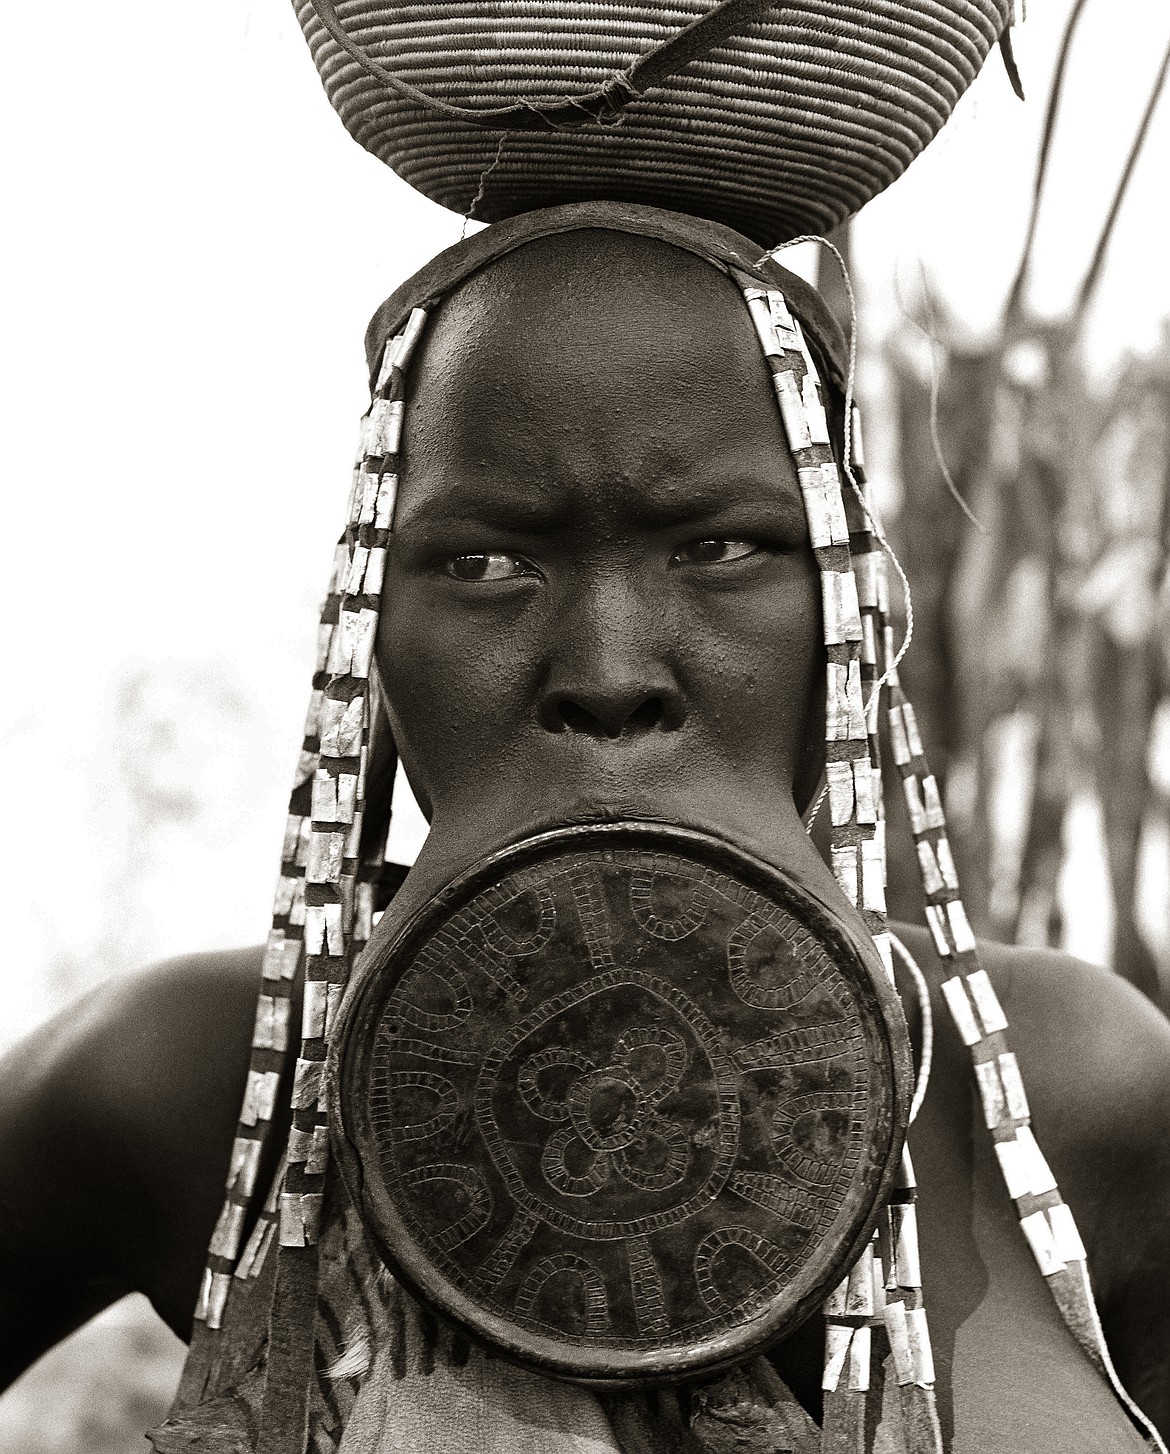 Portrait of a tribal woman in Mali, West Africa by Andrew Geiger. This image was published in Delta&#146;s Sky Magazine.